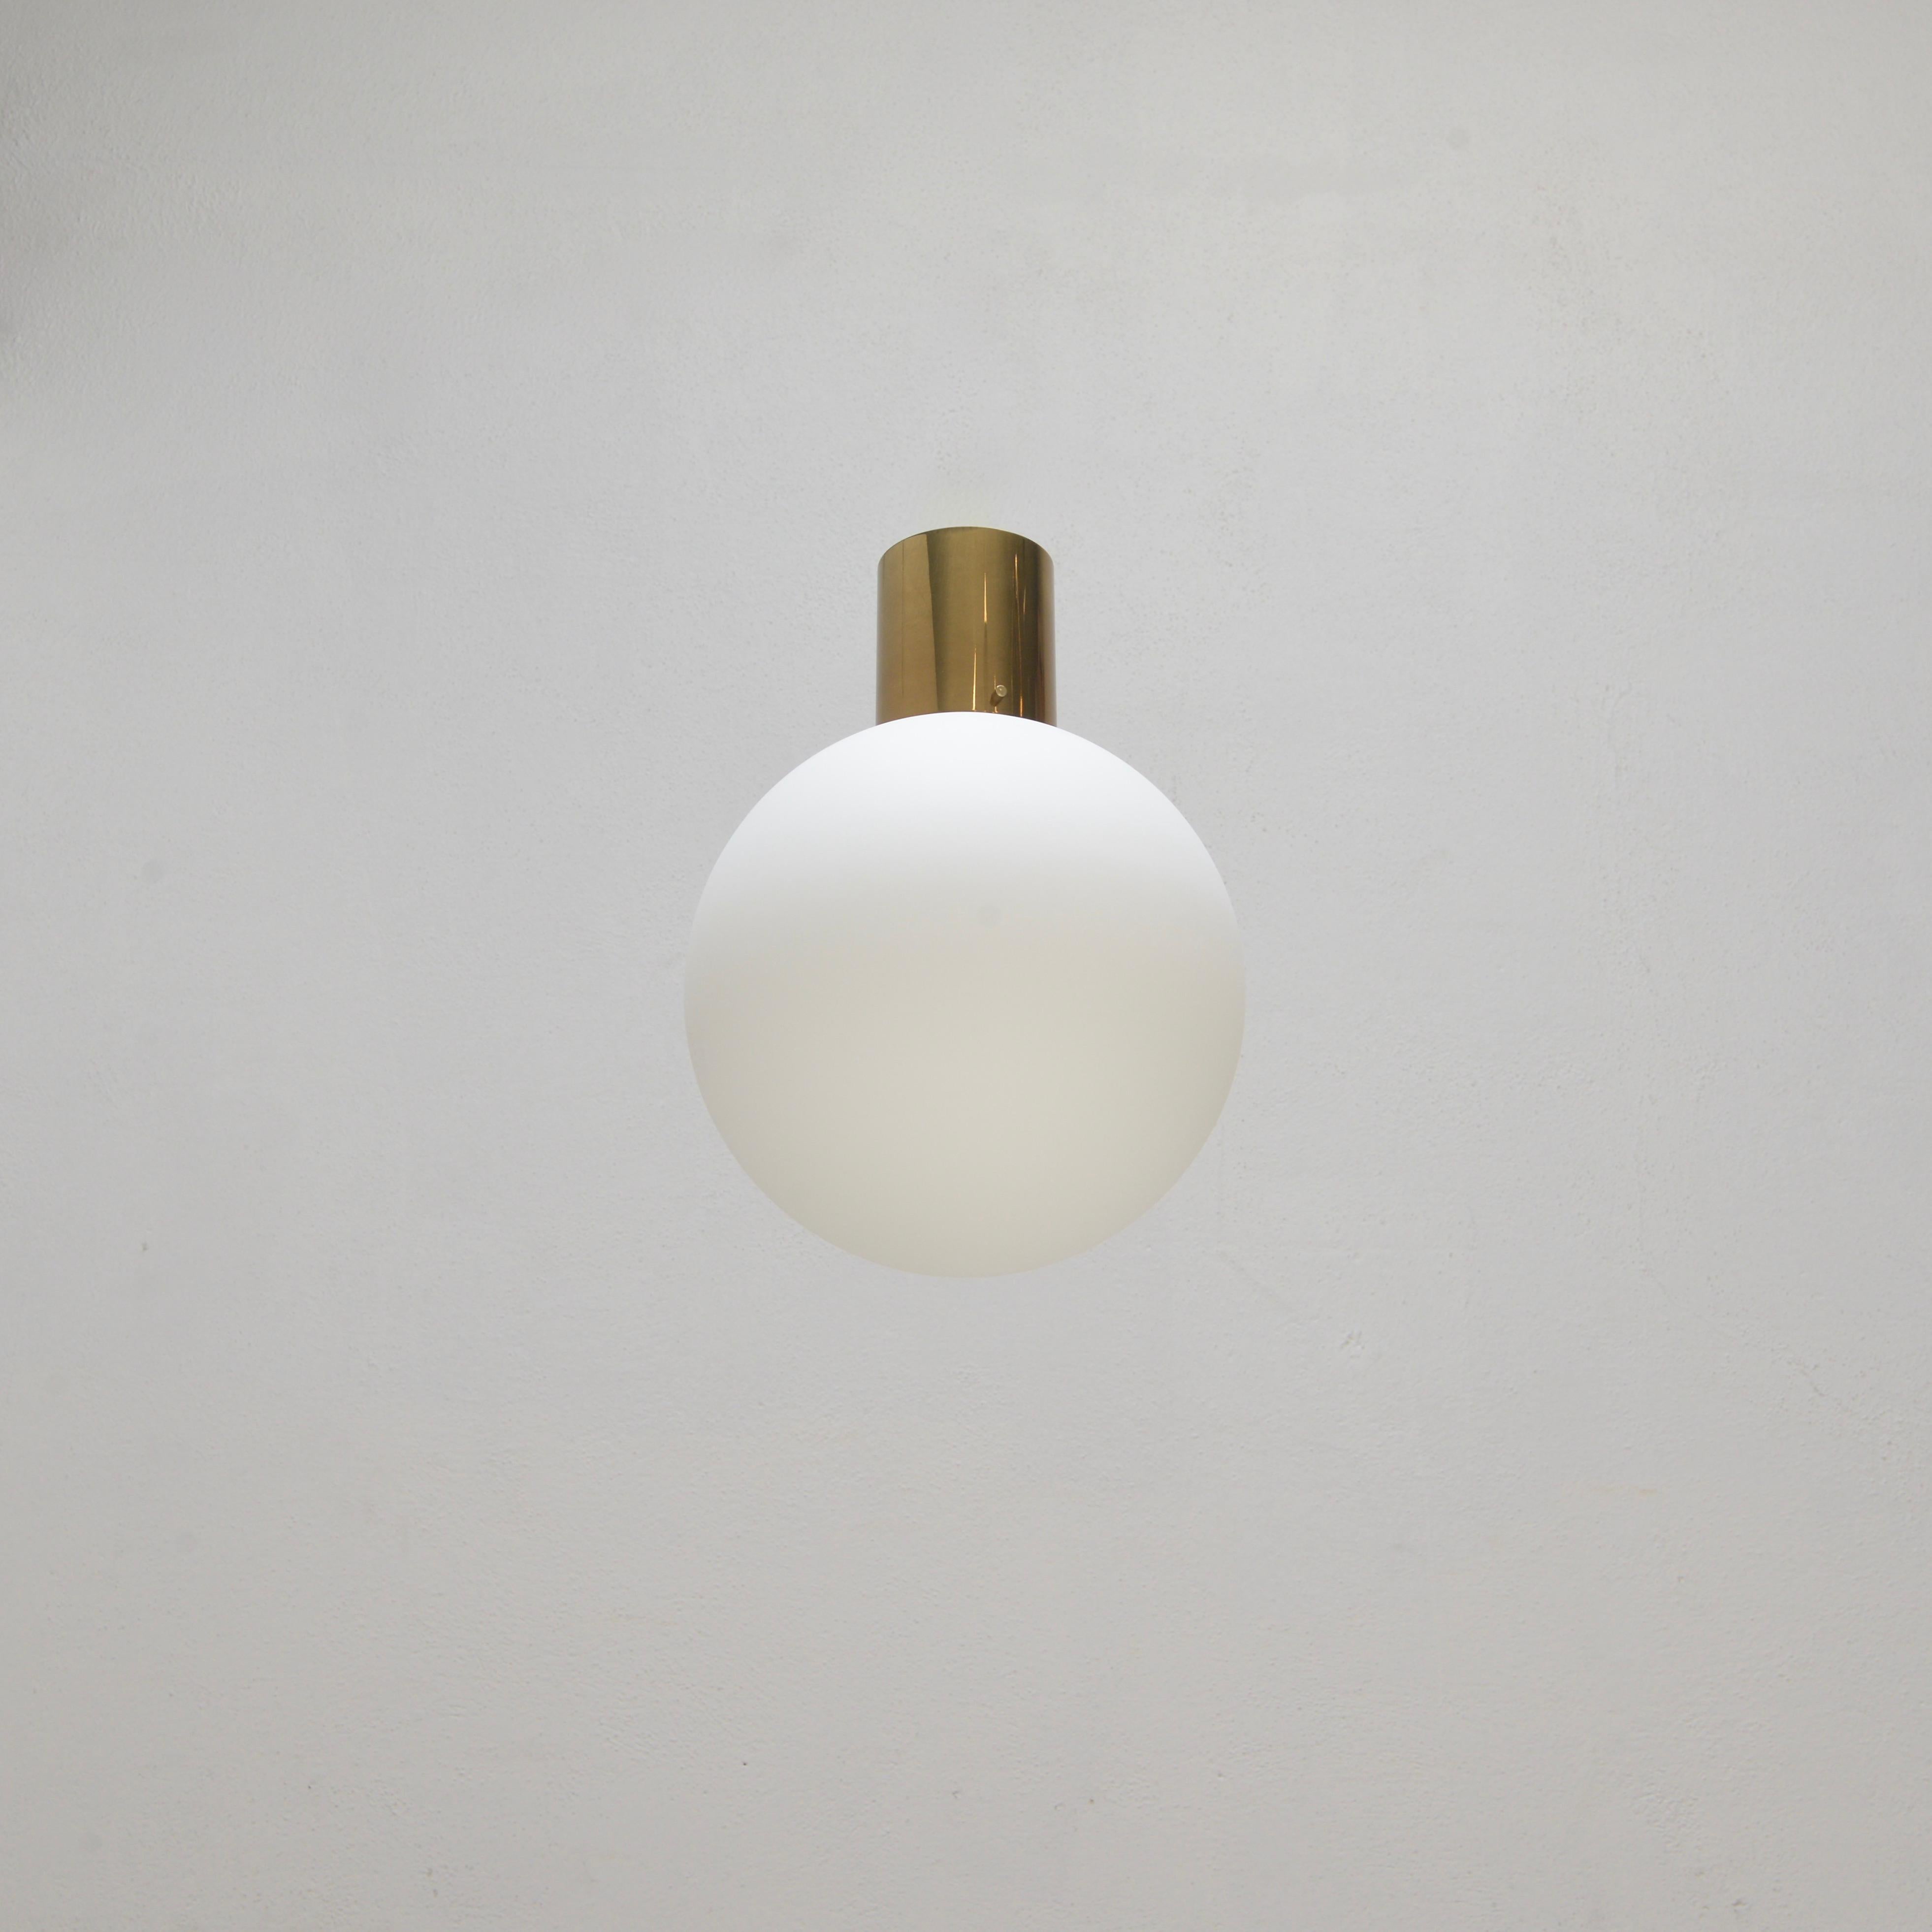 The PLUnet globe ceiling flush mount fixture by Lumfardo Luminiaires is part of our contemporary collection. The PLUnet is a simple yet elegant Mid-Century Modern inspired design of a globe flush mount fixture in patinated brass and glass. Wired